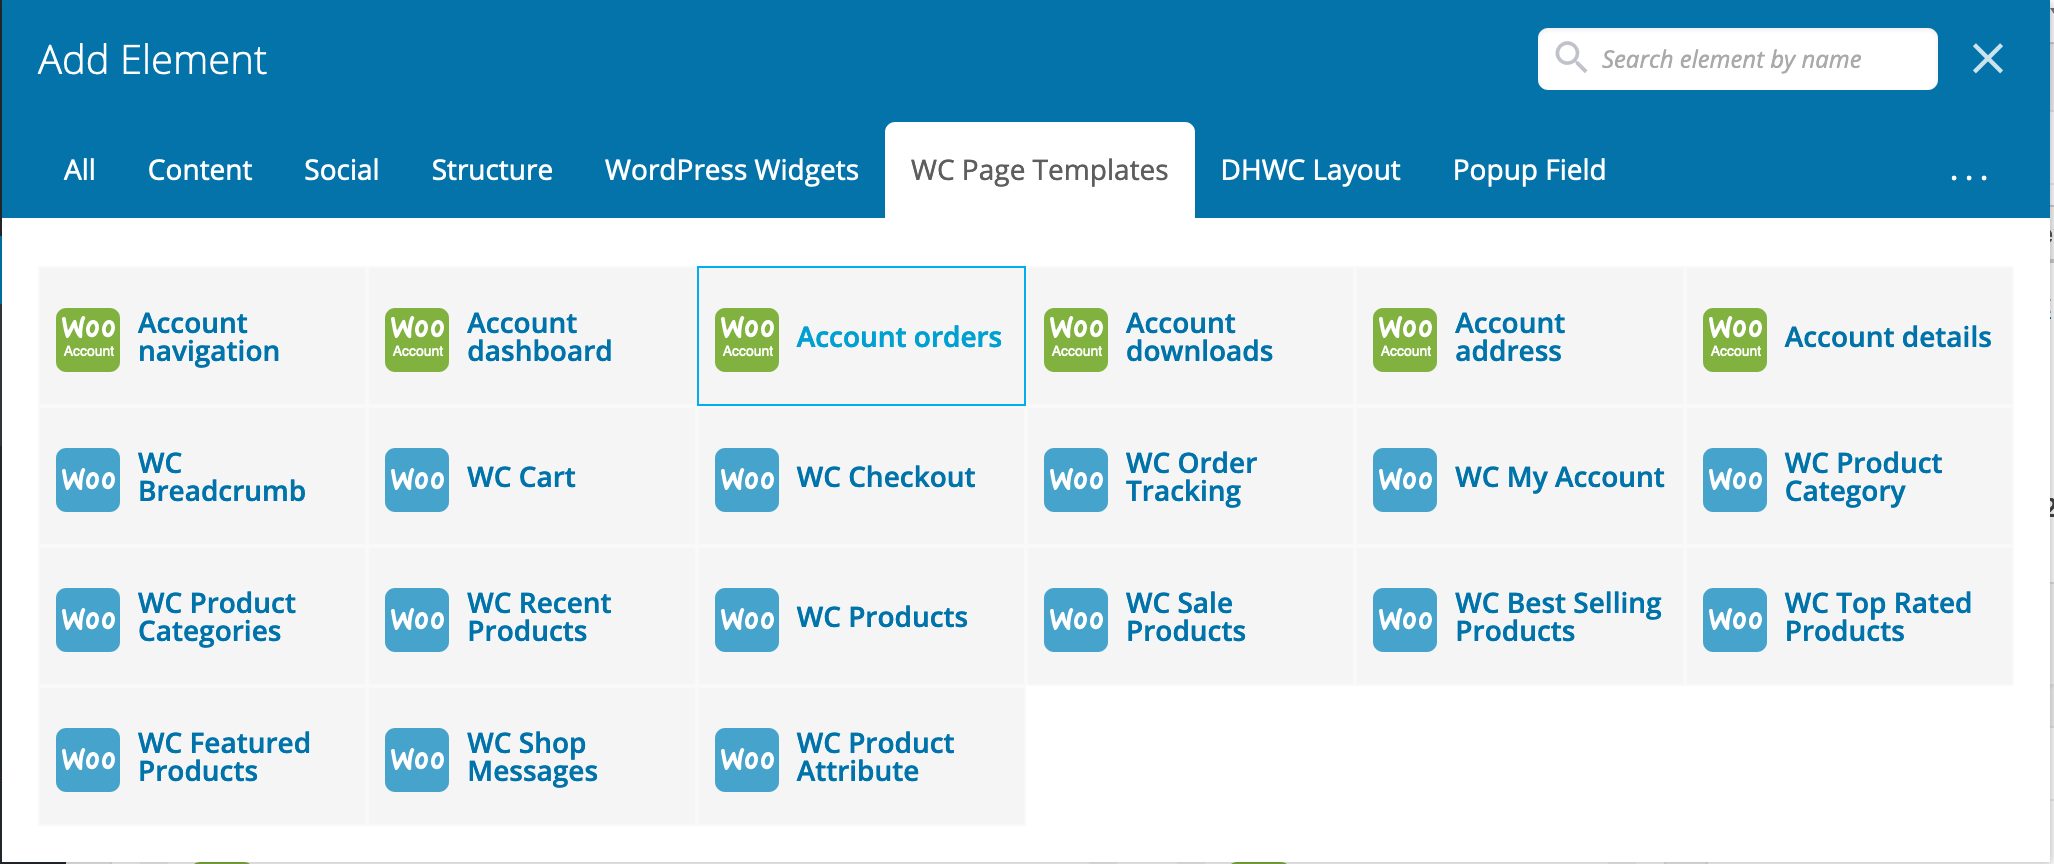 DHWCPage - WooCommerce Page Template Builder - 4